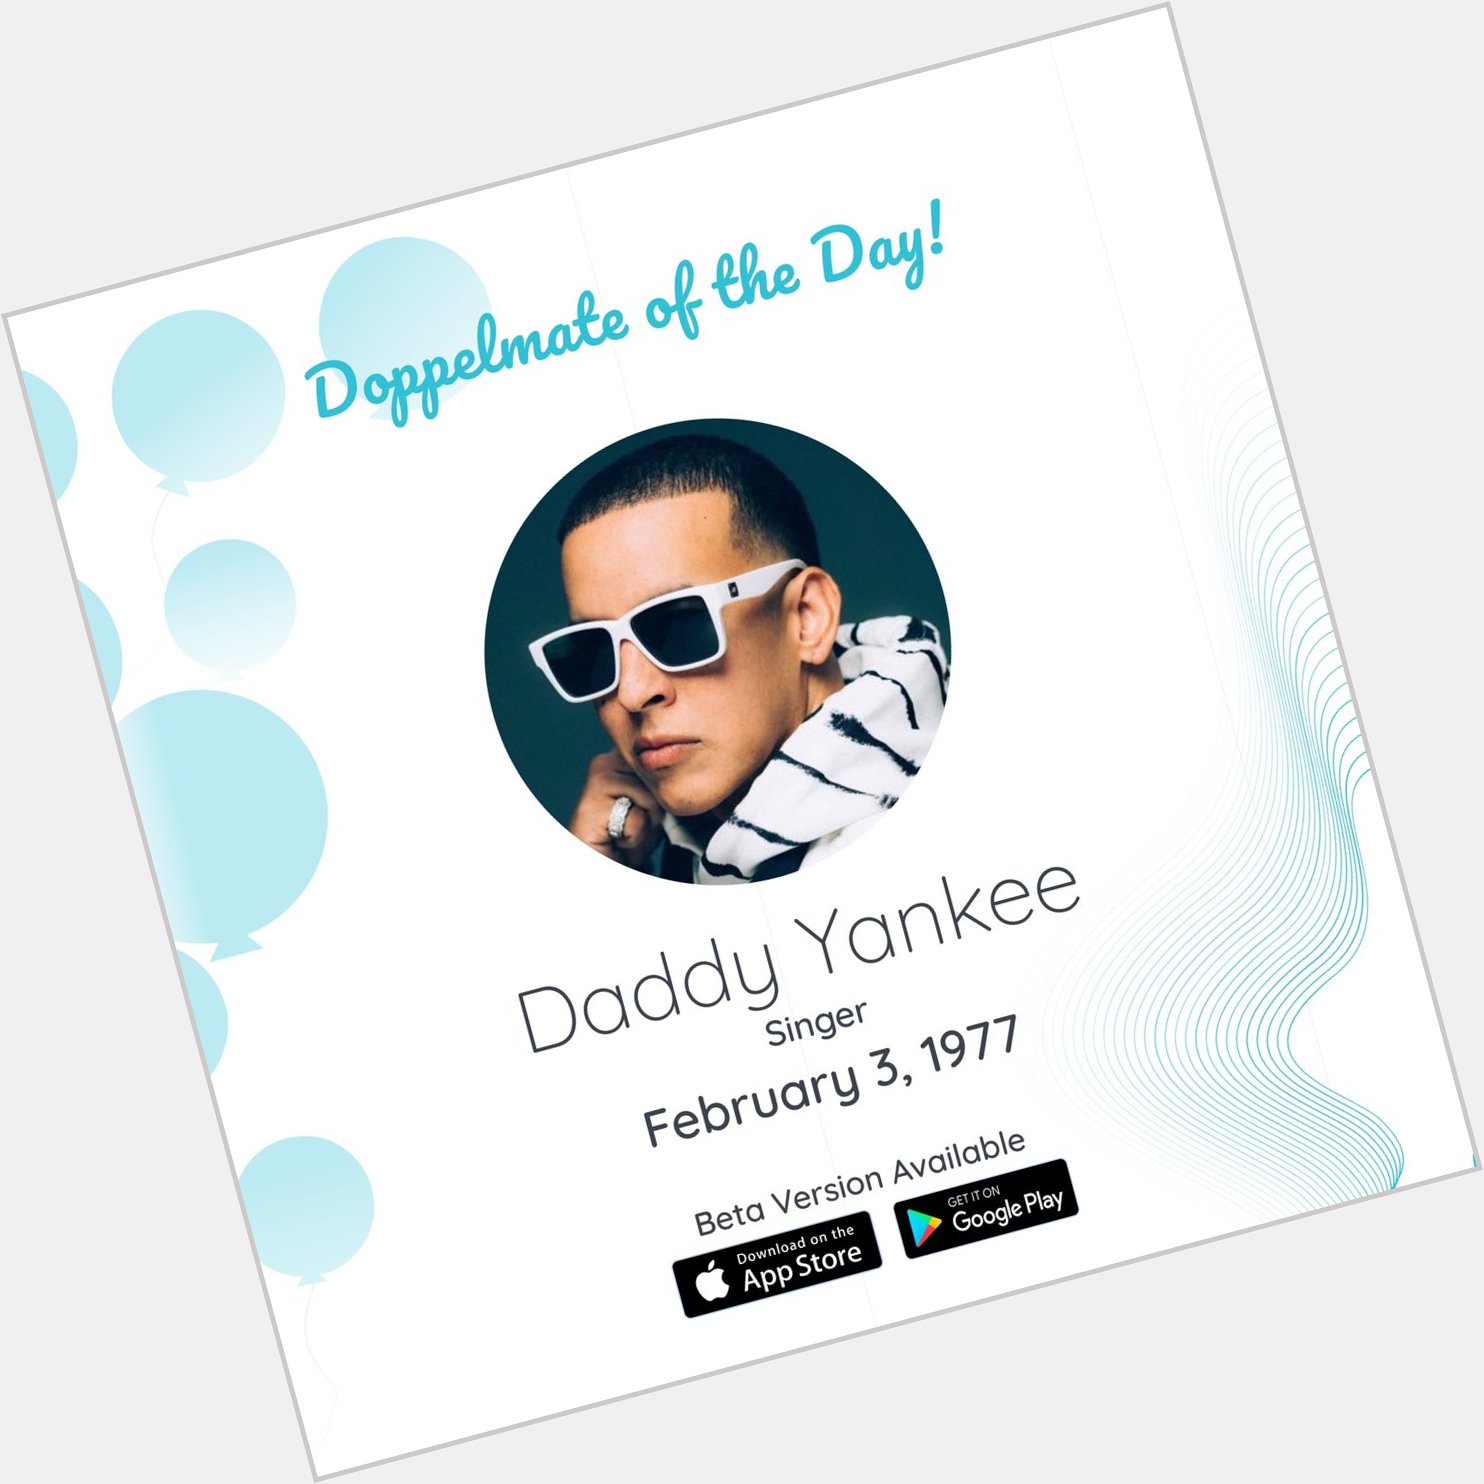 Happy Birthday, Daddy Yankee Visit our website to try the Beta App!    